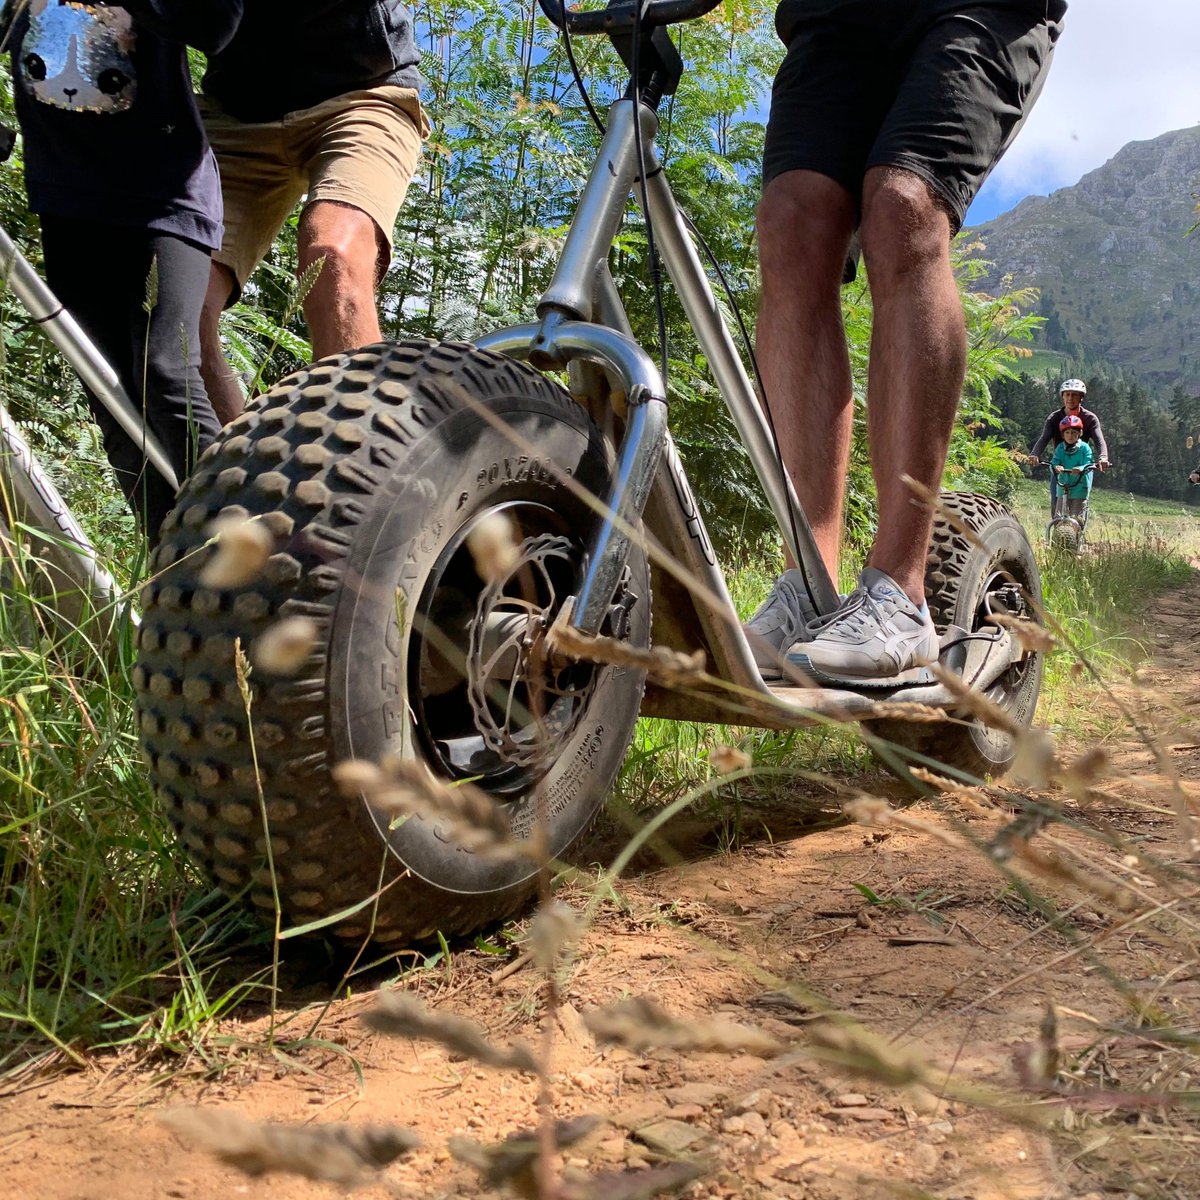 Looking for an exciting family weekend activity? 💥 Race monster mountain scootours through outdoor courses 🛴 You can freewheel through a bush tunnel, glide through vineyards or take 2 off-road tracks in the city at Scootours. Read more about booking ⬇️ capetownmagazine.com/scootours-cape…